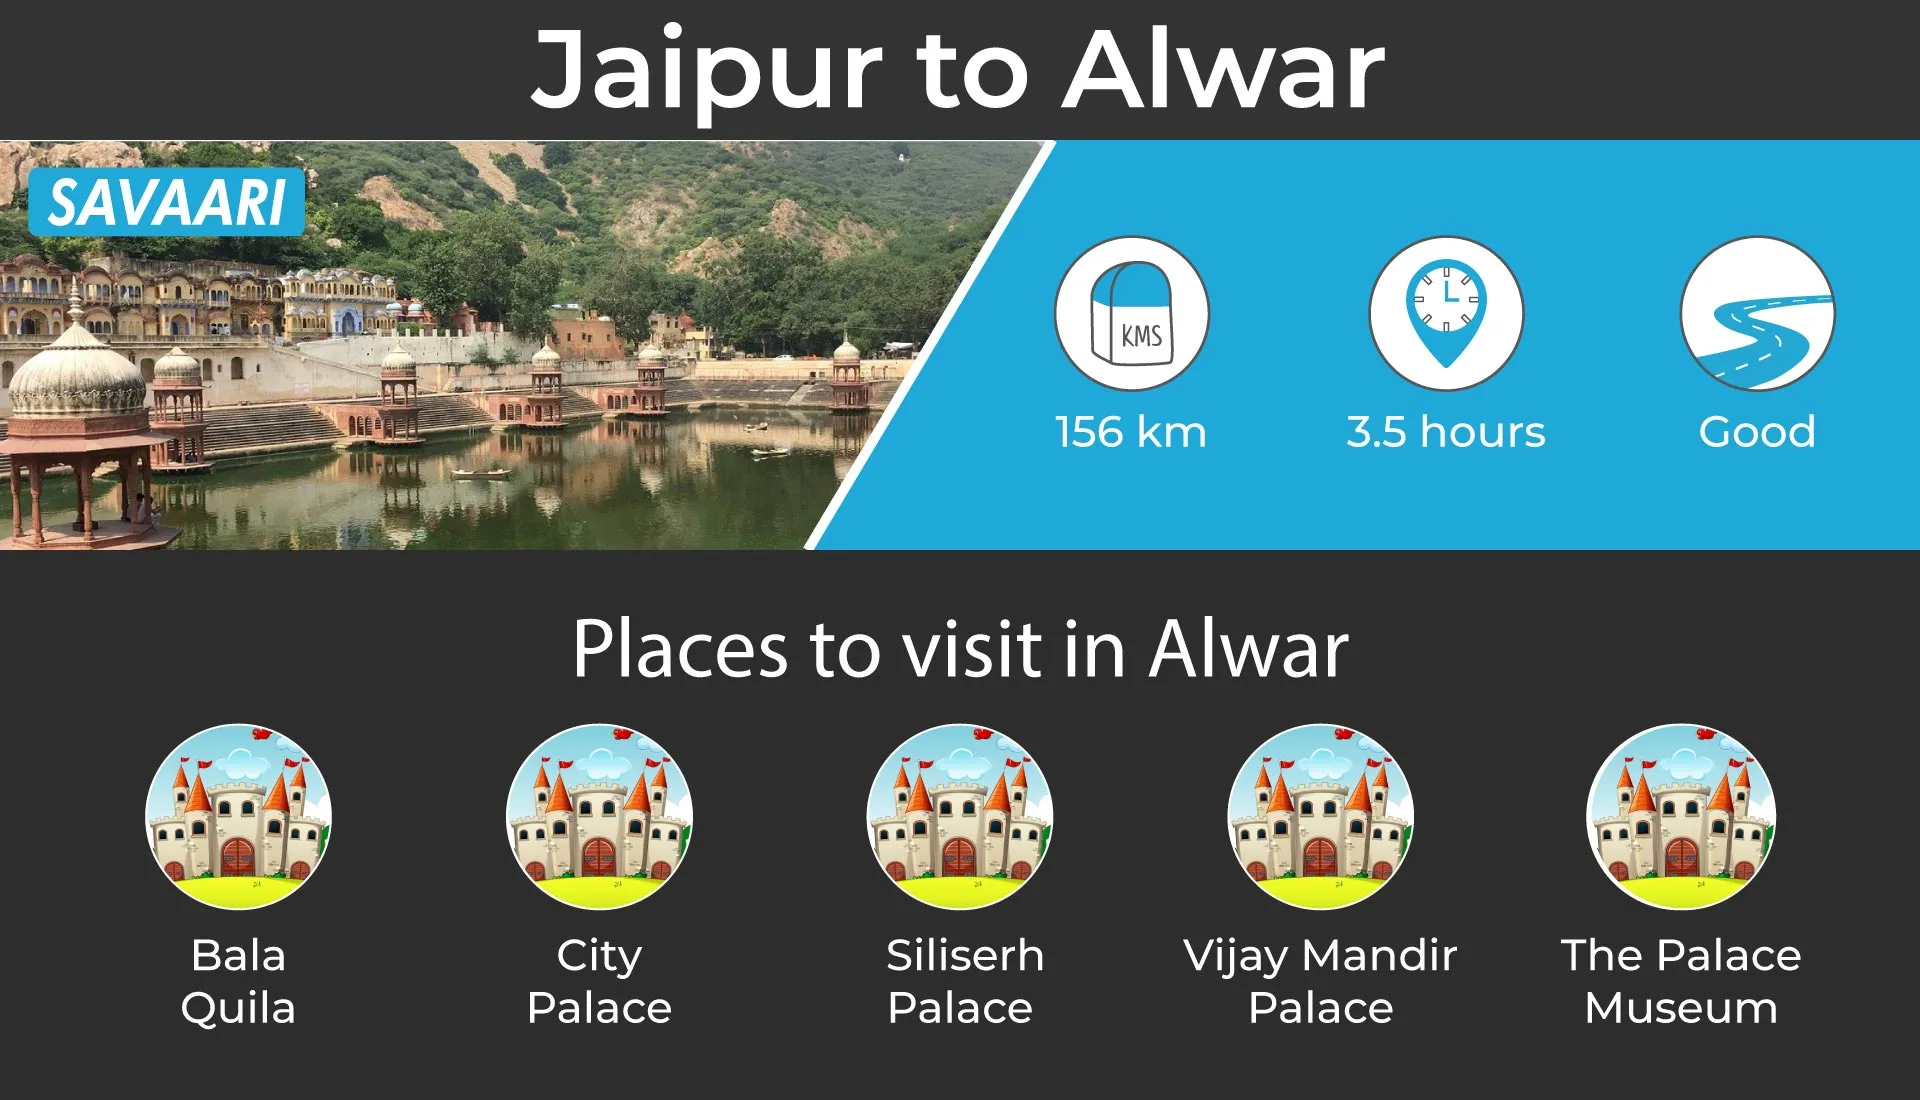 Alwar places to visit near jaipur by road